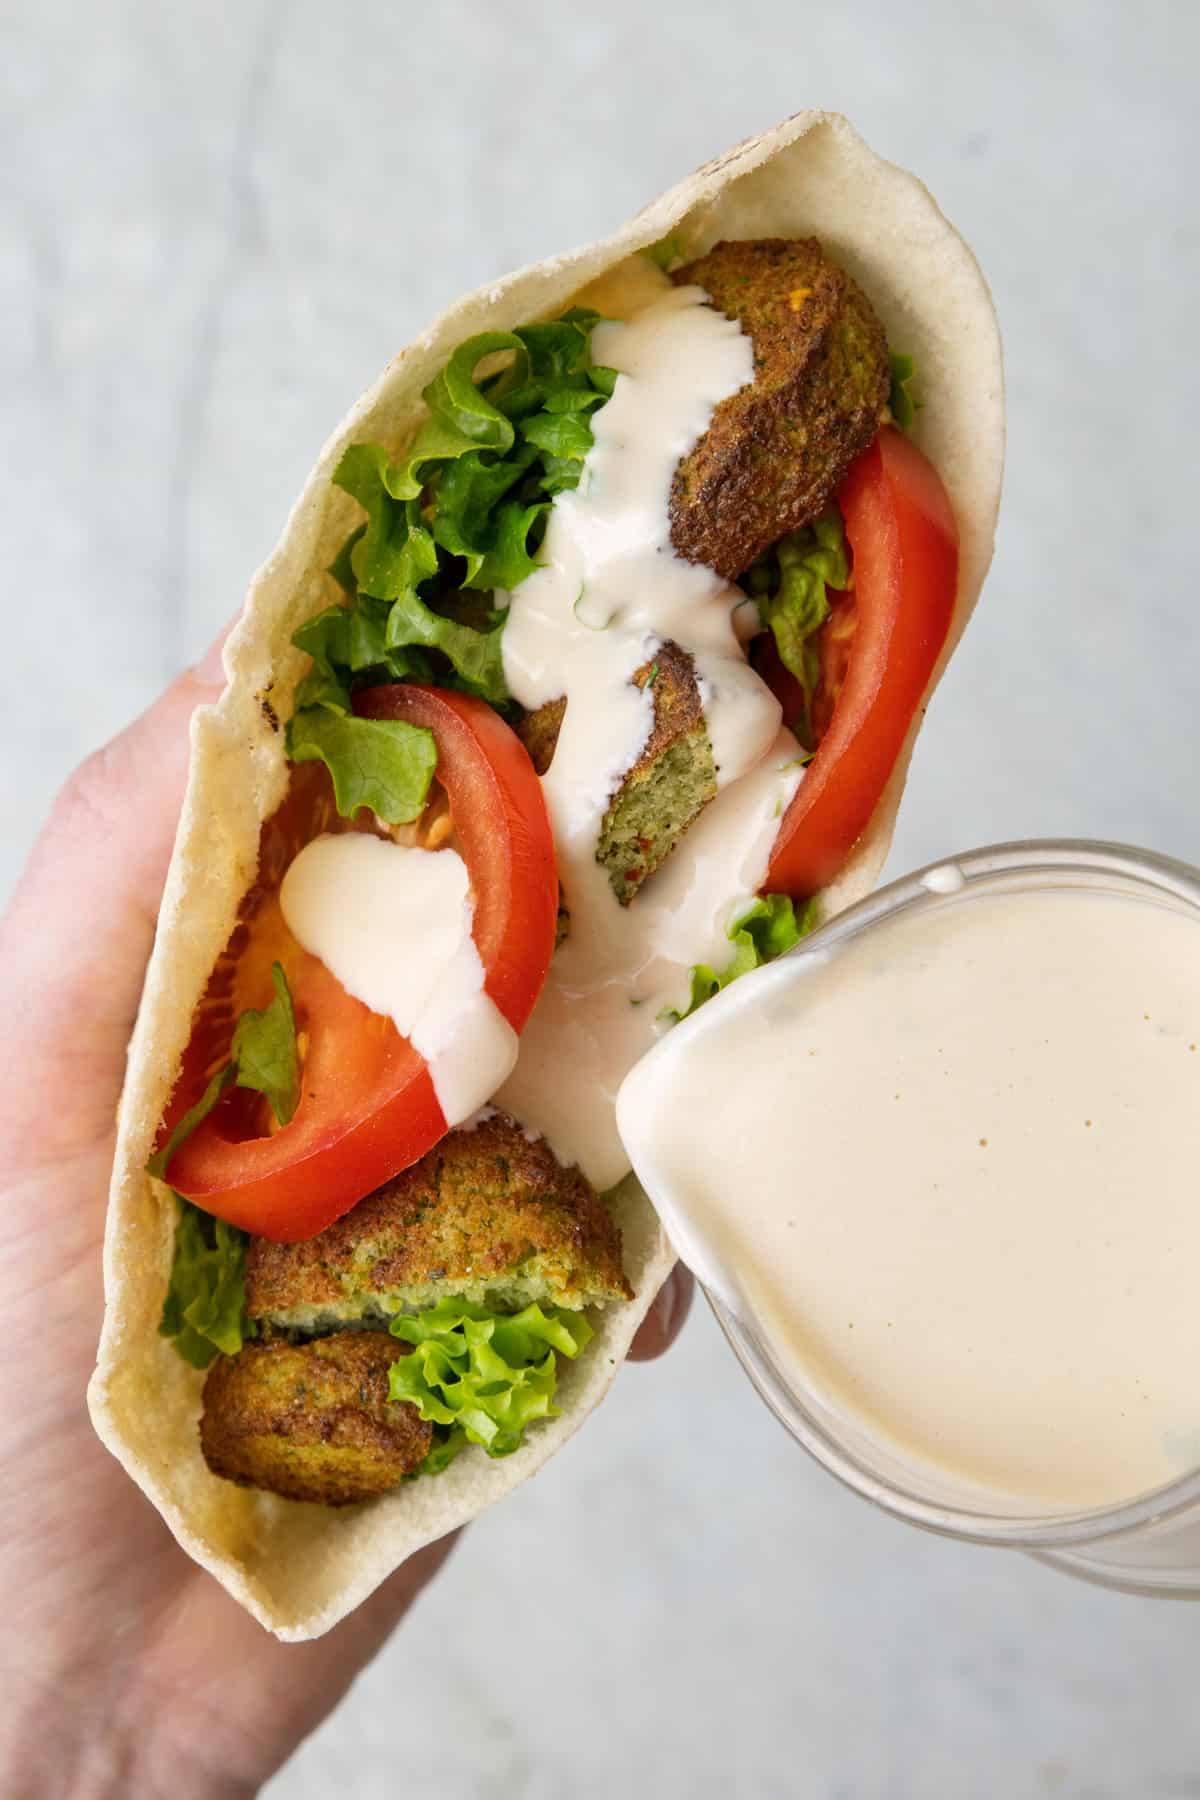 Tahini sauce being poured over a falafel pita stuffed with sliced tomatoes and lettuce.